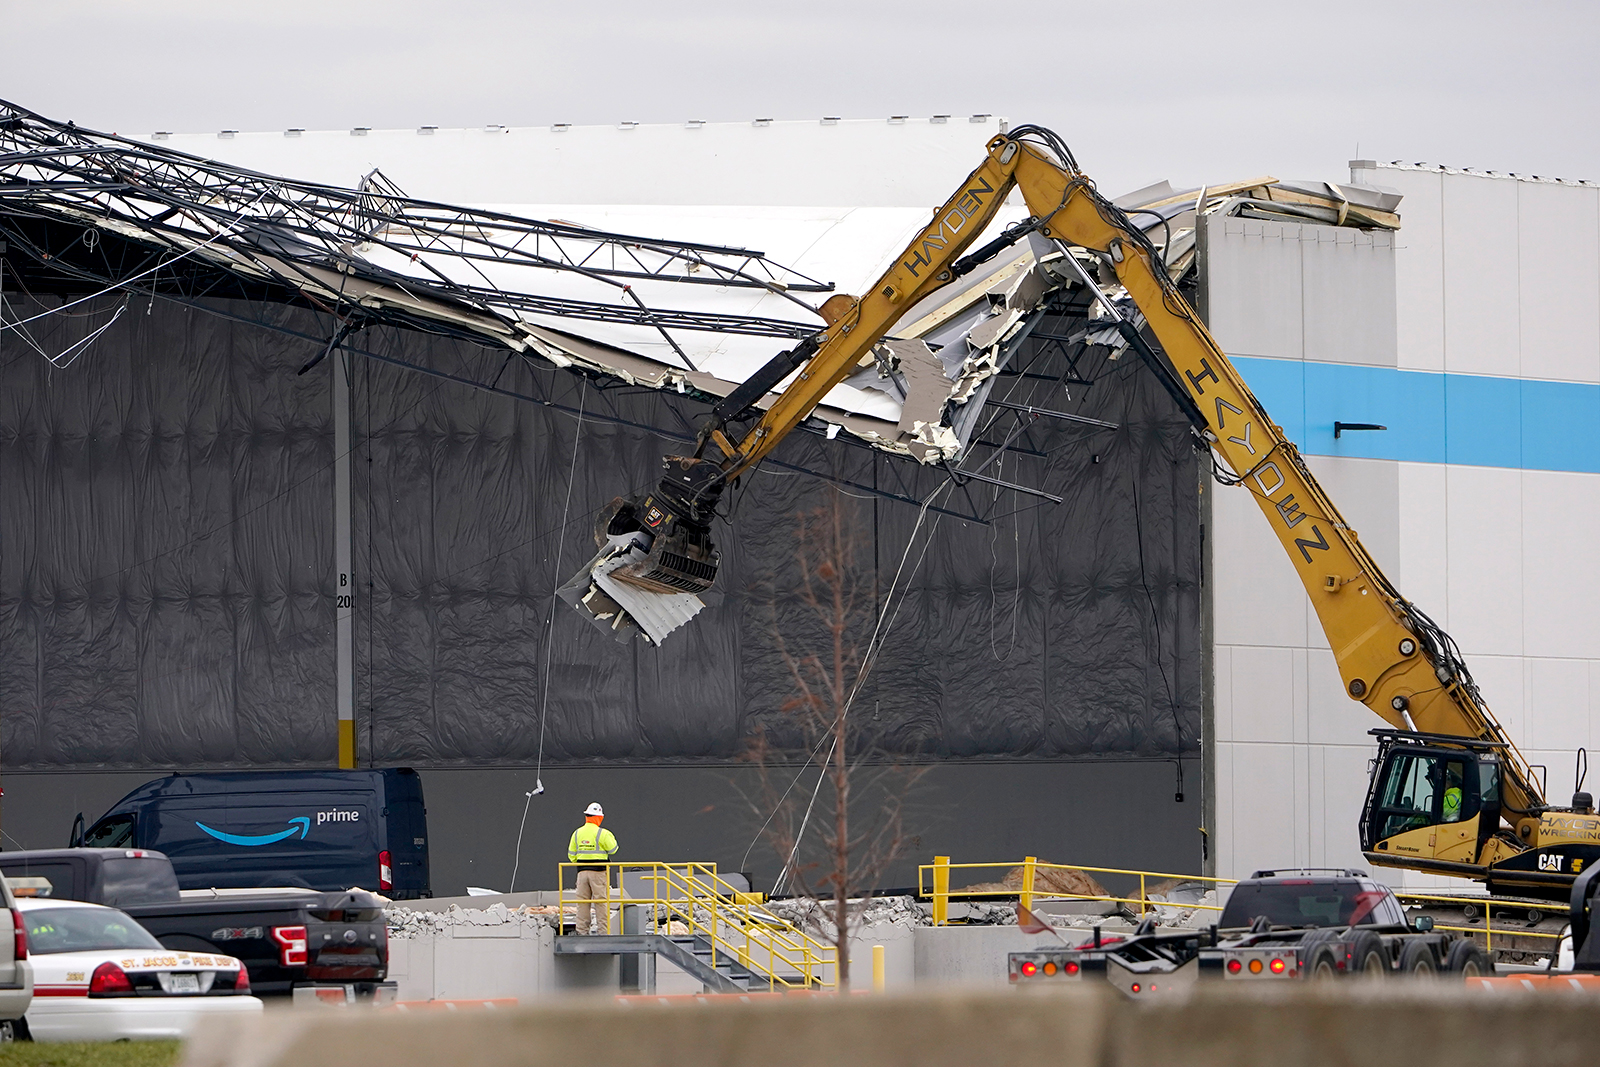 Workers use equipment to remove a section of roof left on a heavily damaged Amazon fulfillment center Saturday, Dec. 11, 2021, in Edwardsville, Ill. (Jeff Roberson/AP)